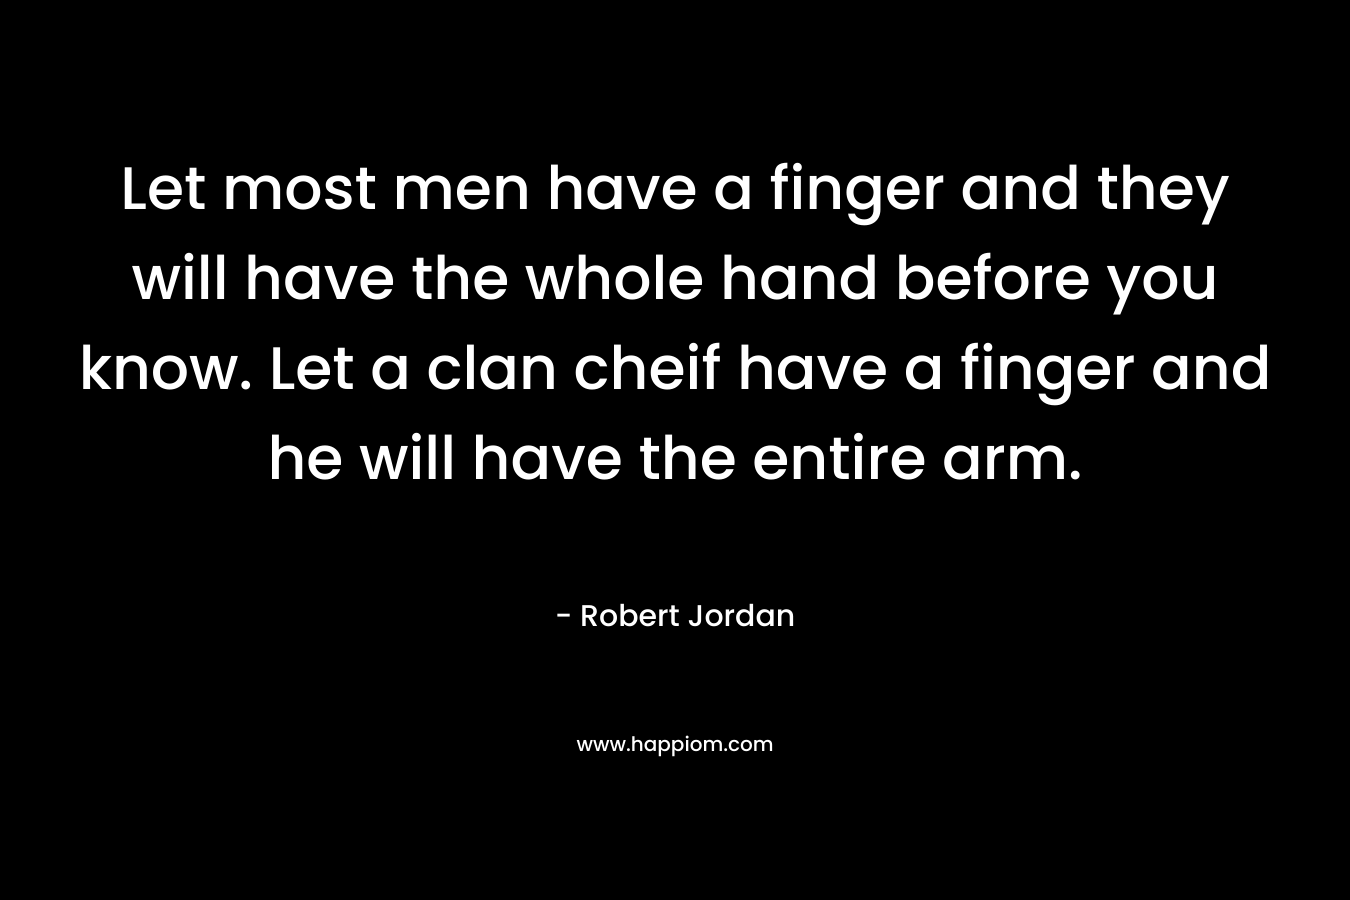 Let most men have a finger and they will have the whole hand before you know. Let a clan cheif have a finger and he will have the entire arm.